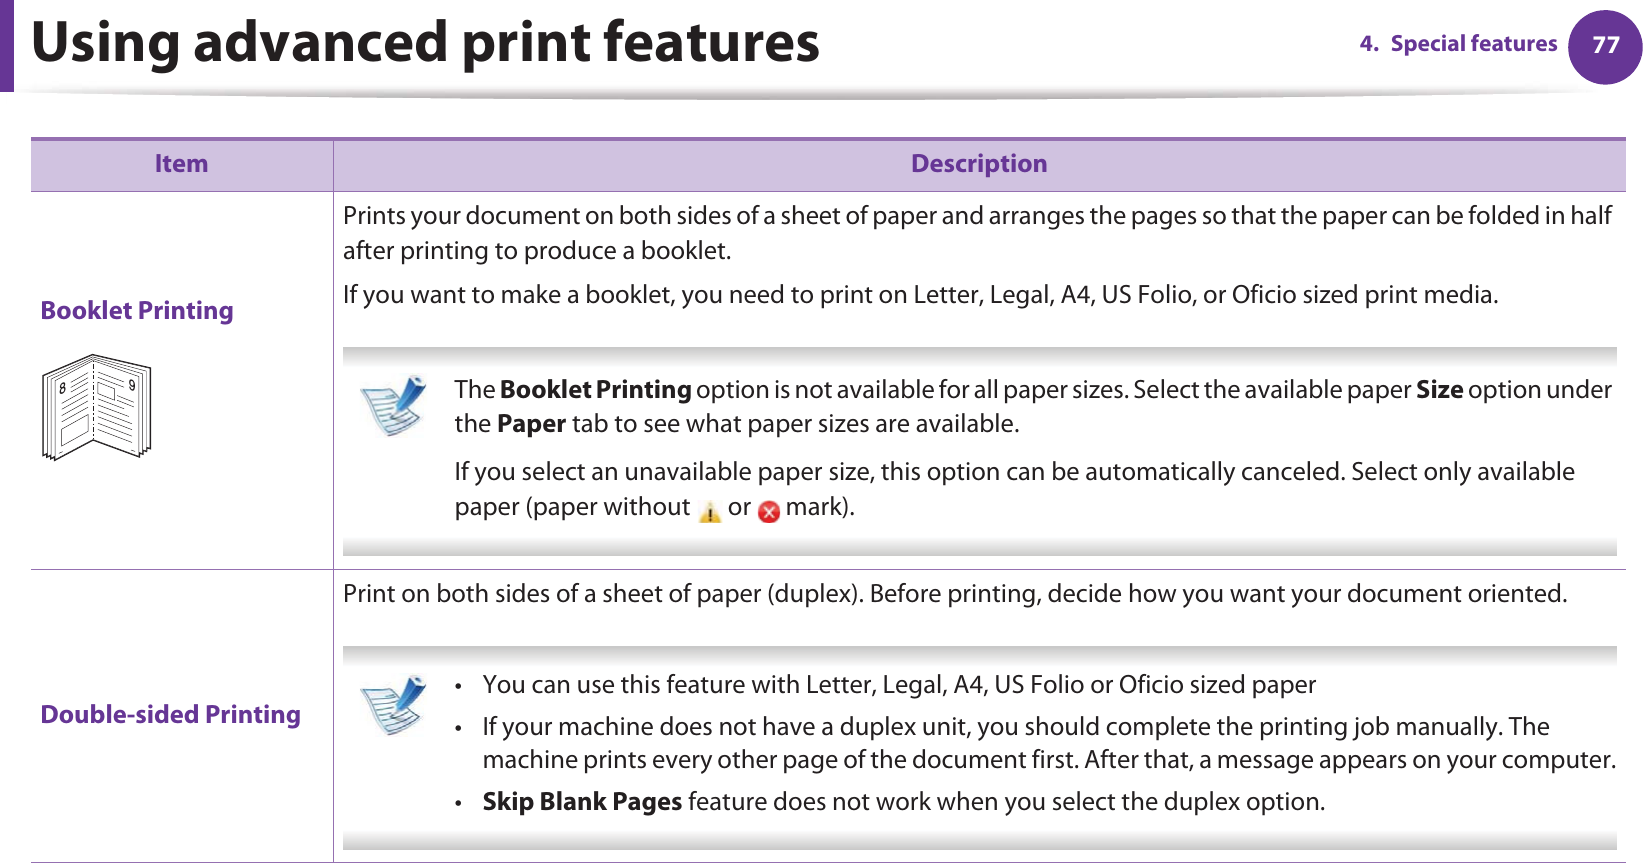 Using advanced print features 774. Special featuresBooklet PrintingPrints your document on both sides of a sheet of paper and arranges the pages so that the paper can be folded in half after printing to produce a booklet.If you want to make a booklet, you need to print on Letter, Legal, A4, US Folio, or Oficio sized print media.  The Booklet Printing option is not available for all paper sizes. Select the available paper Size option under the Paper tab to see what paper sizes are available.If you select an unavailable paper size, this option can be automatically canceled. Select only available paper (paper without   or   mark). Double-sided PrintingPrint on both sides of a sheet of paper (duplex). Before printing, decide how you want your document oriented.  • You can use this feature with Letter, Legal, A4, US Folio or Oficio sized paper • If your machine does not have a duplex unit, you should complete the printing job manually. The machine prints every other page of the document first. After that, a message appears on your computer.•Skip Blank Pages feature does not work when you select the duplex option. Item Description89